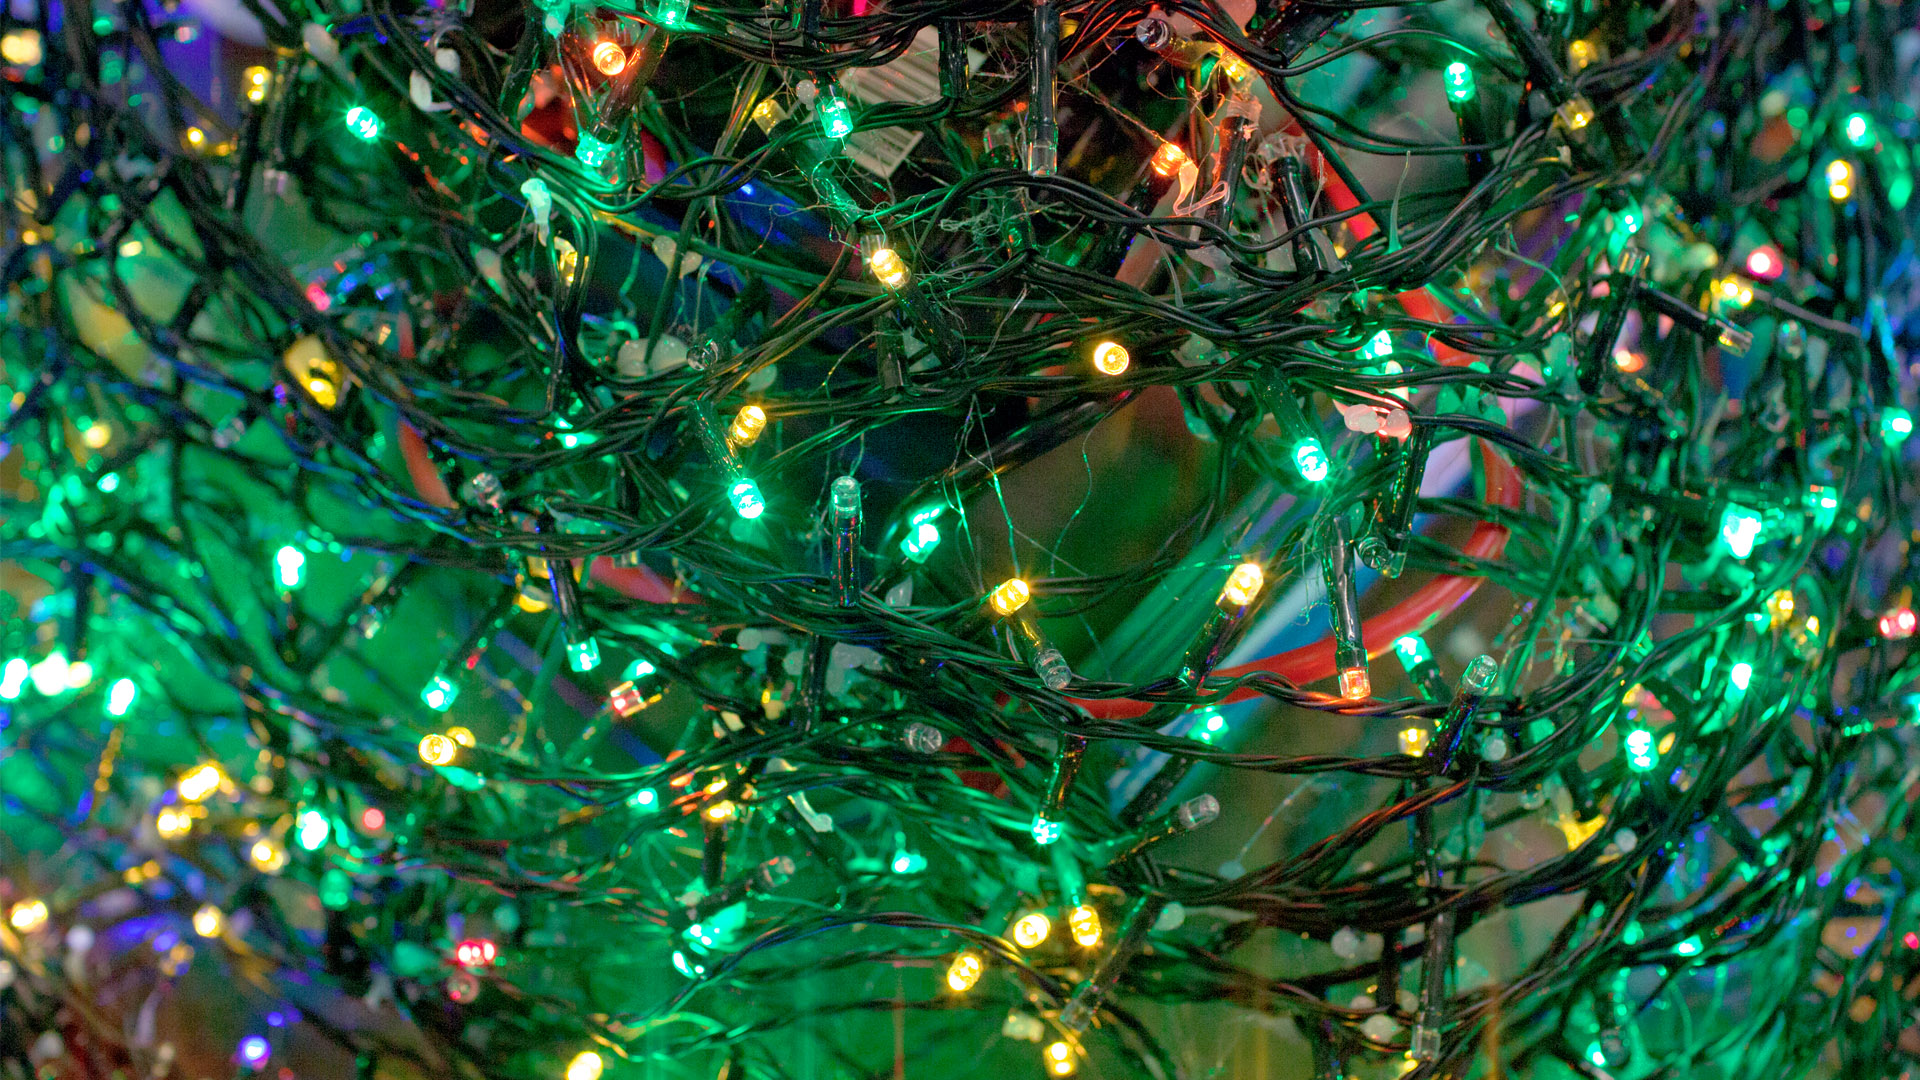 Project_images2_0004s_0003_Deconstructed_xmas_lights